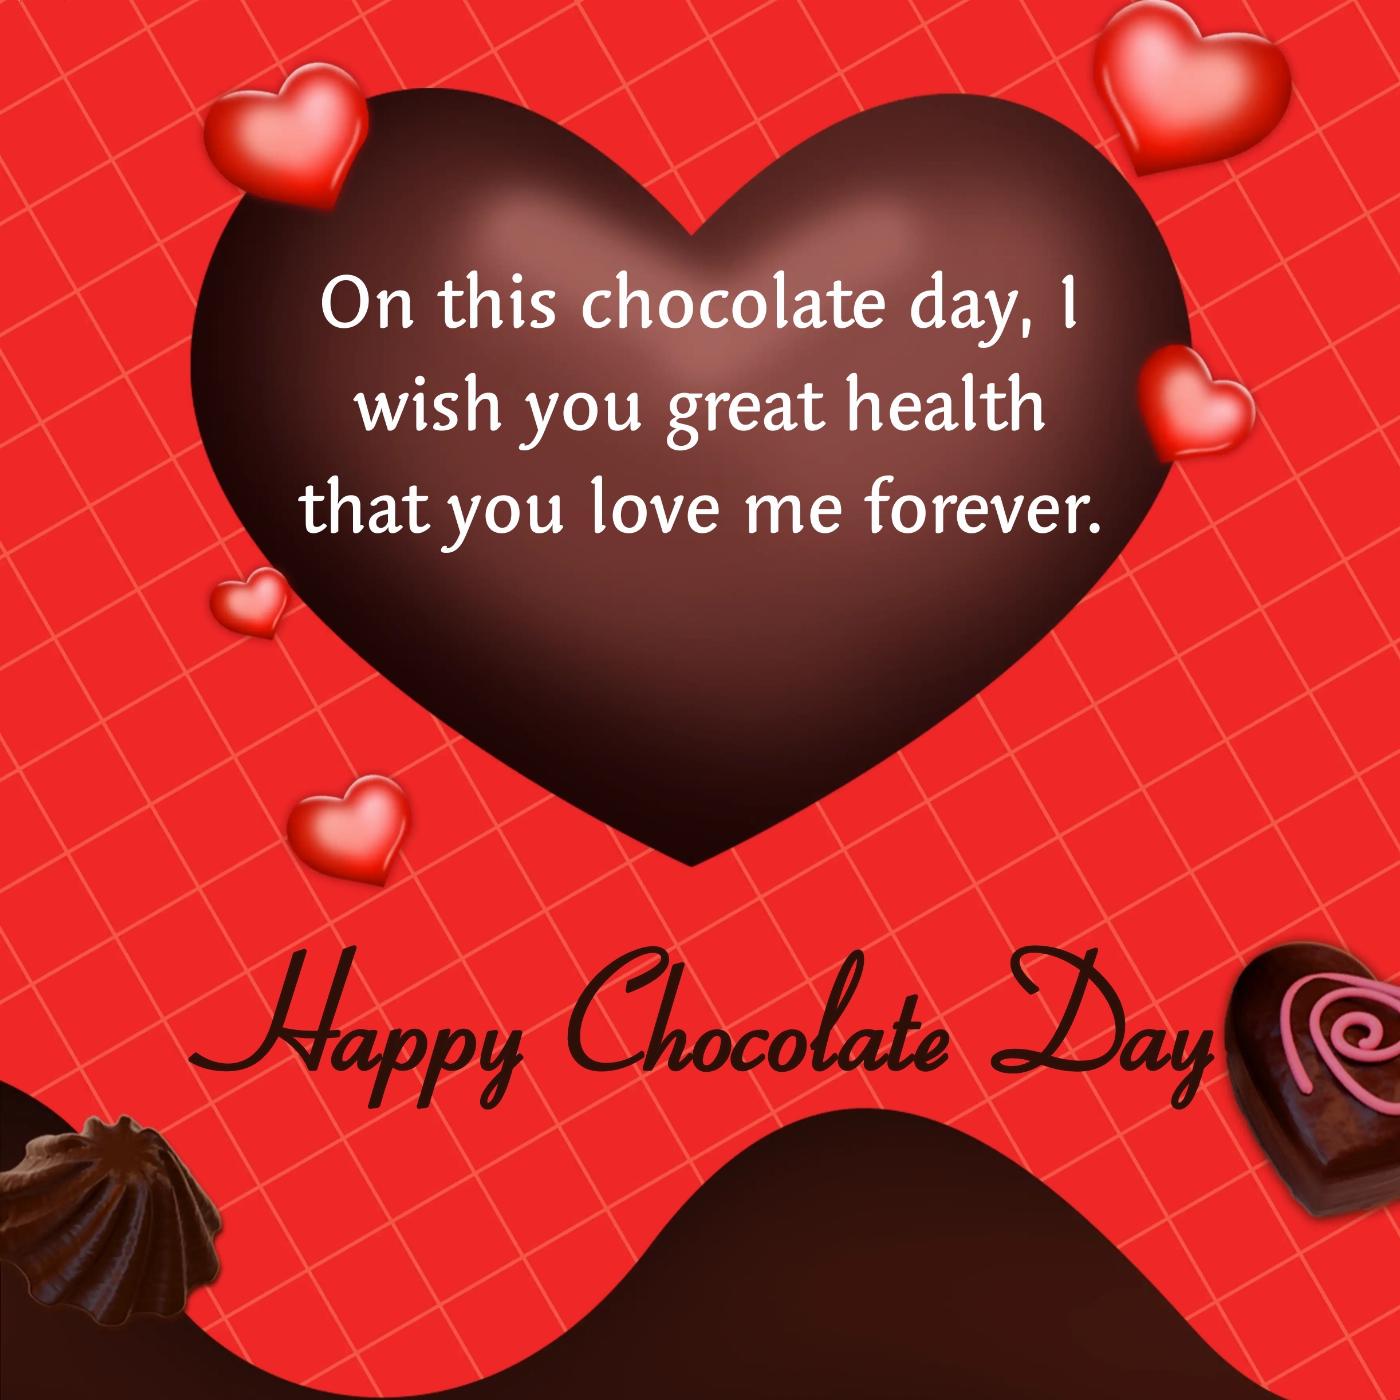 On this chocolate day I wish you great health